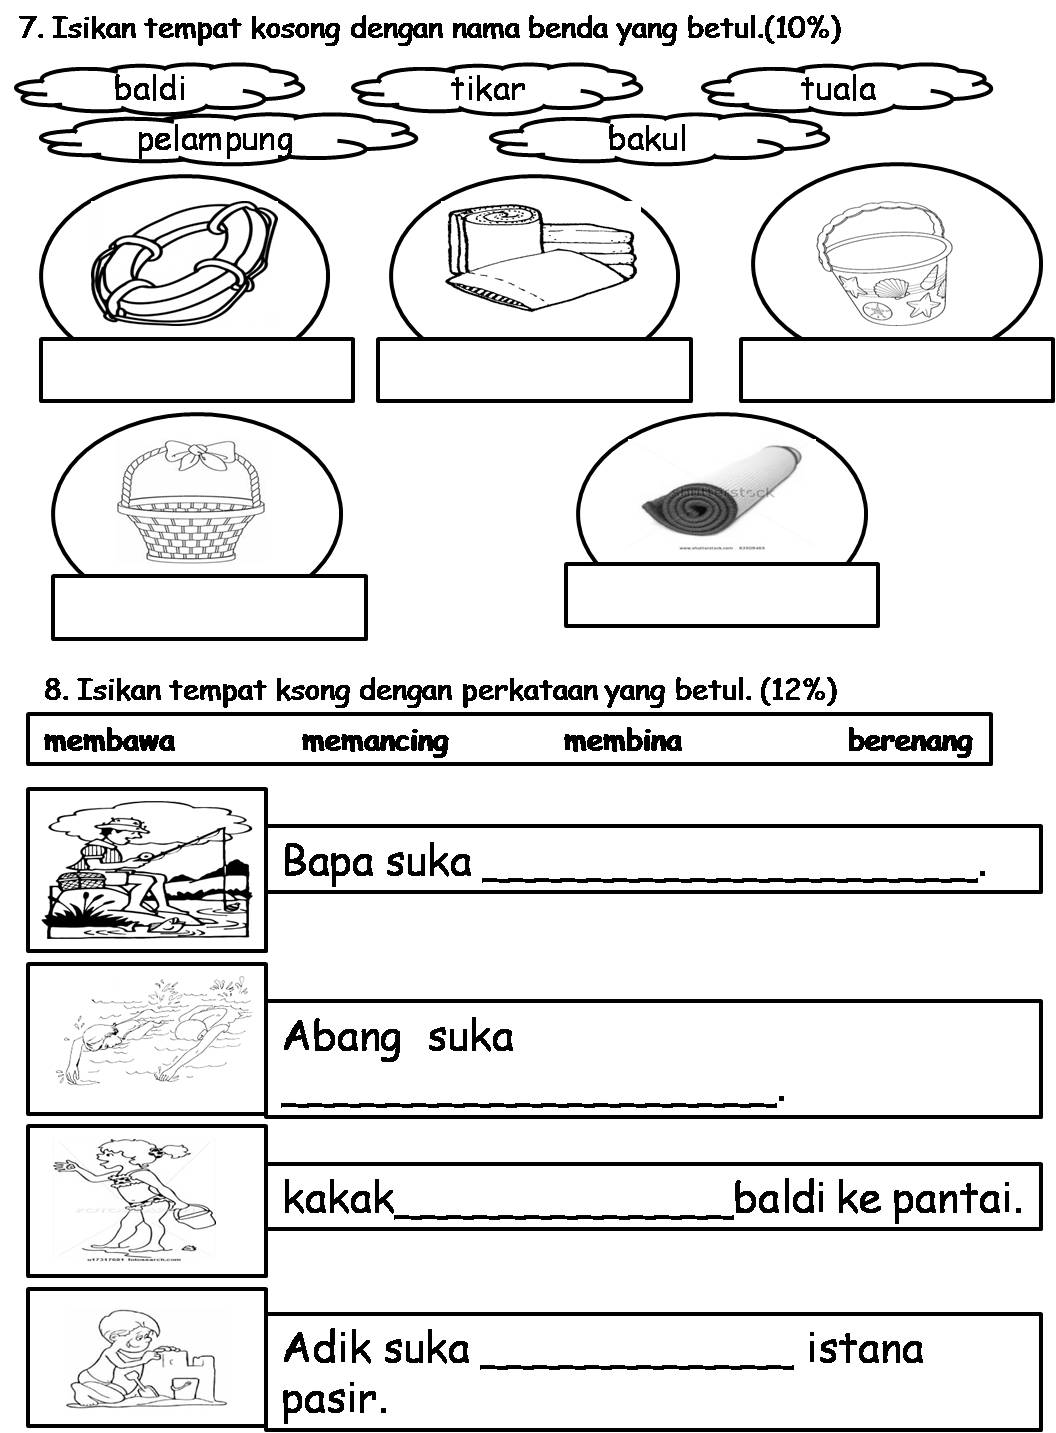 Welcome To Teacher Gesscy Site PRESCHOOL 5 AND 6 YEARS OLD SAMPLE QUESTION EXAM BAHASA MALAYSIA